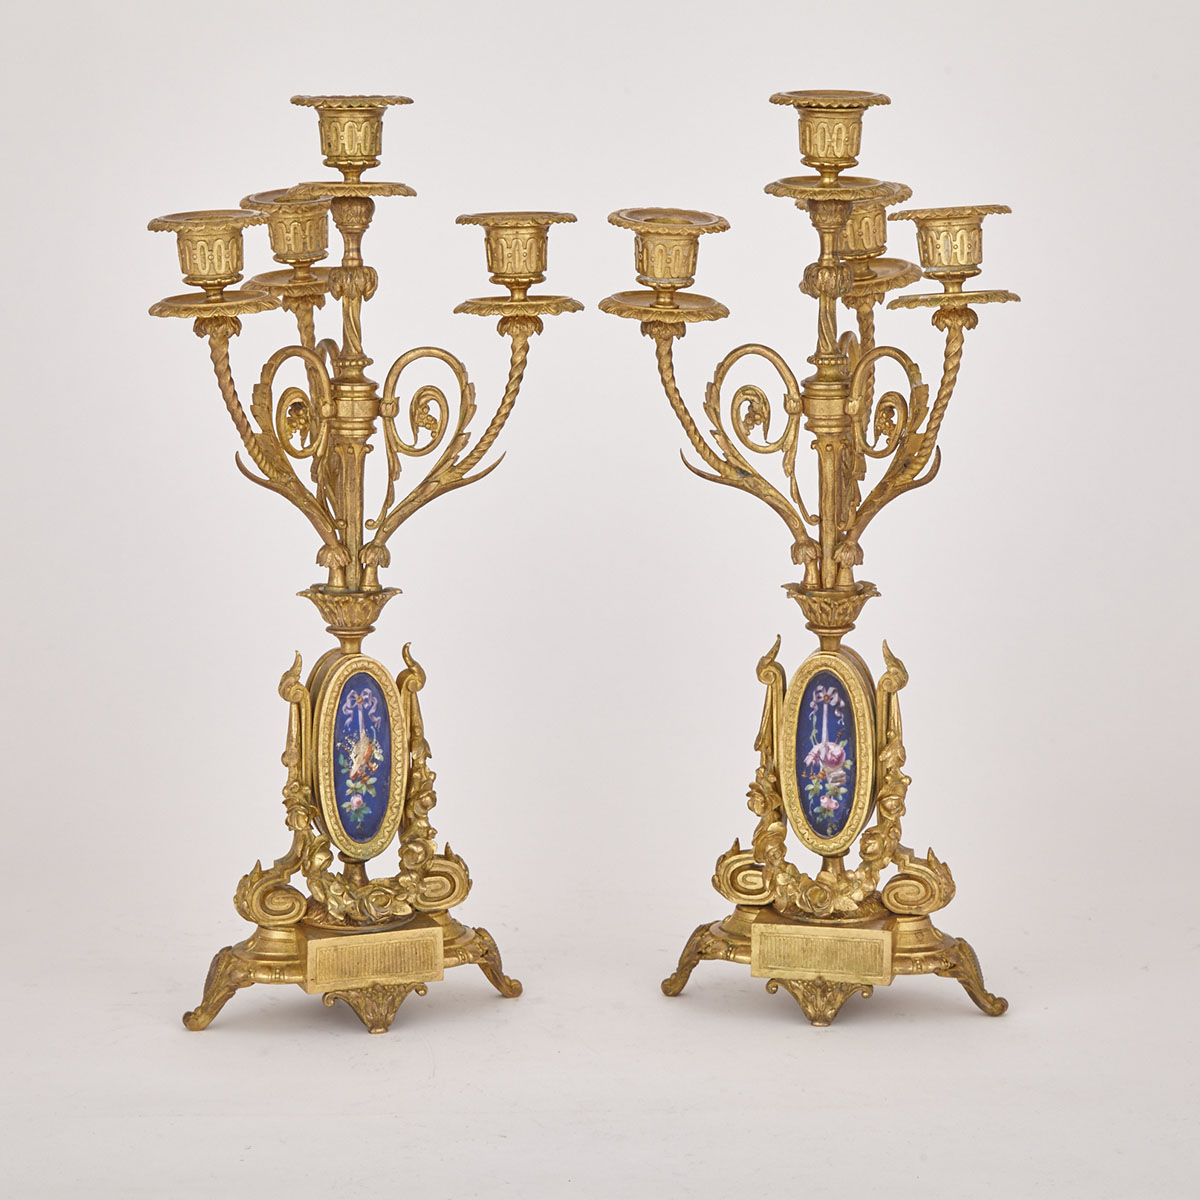 Pair of French Aesthetic Movement Porcelain Mounted Gilt Bronze Mantel Candelabra, 19th century